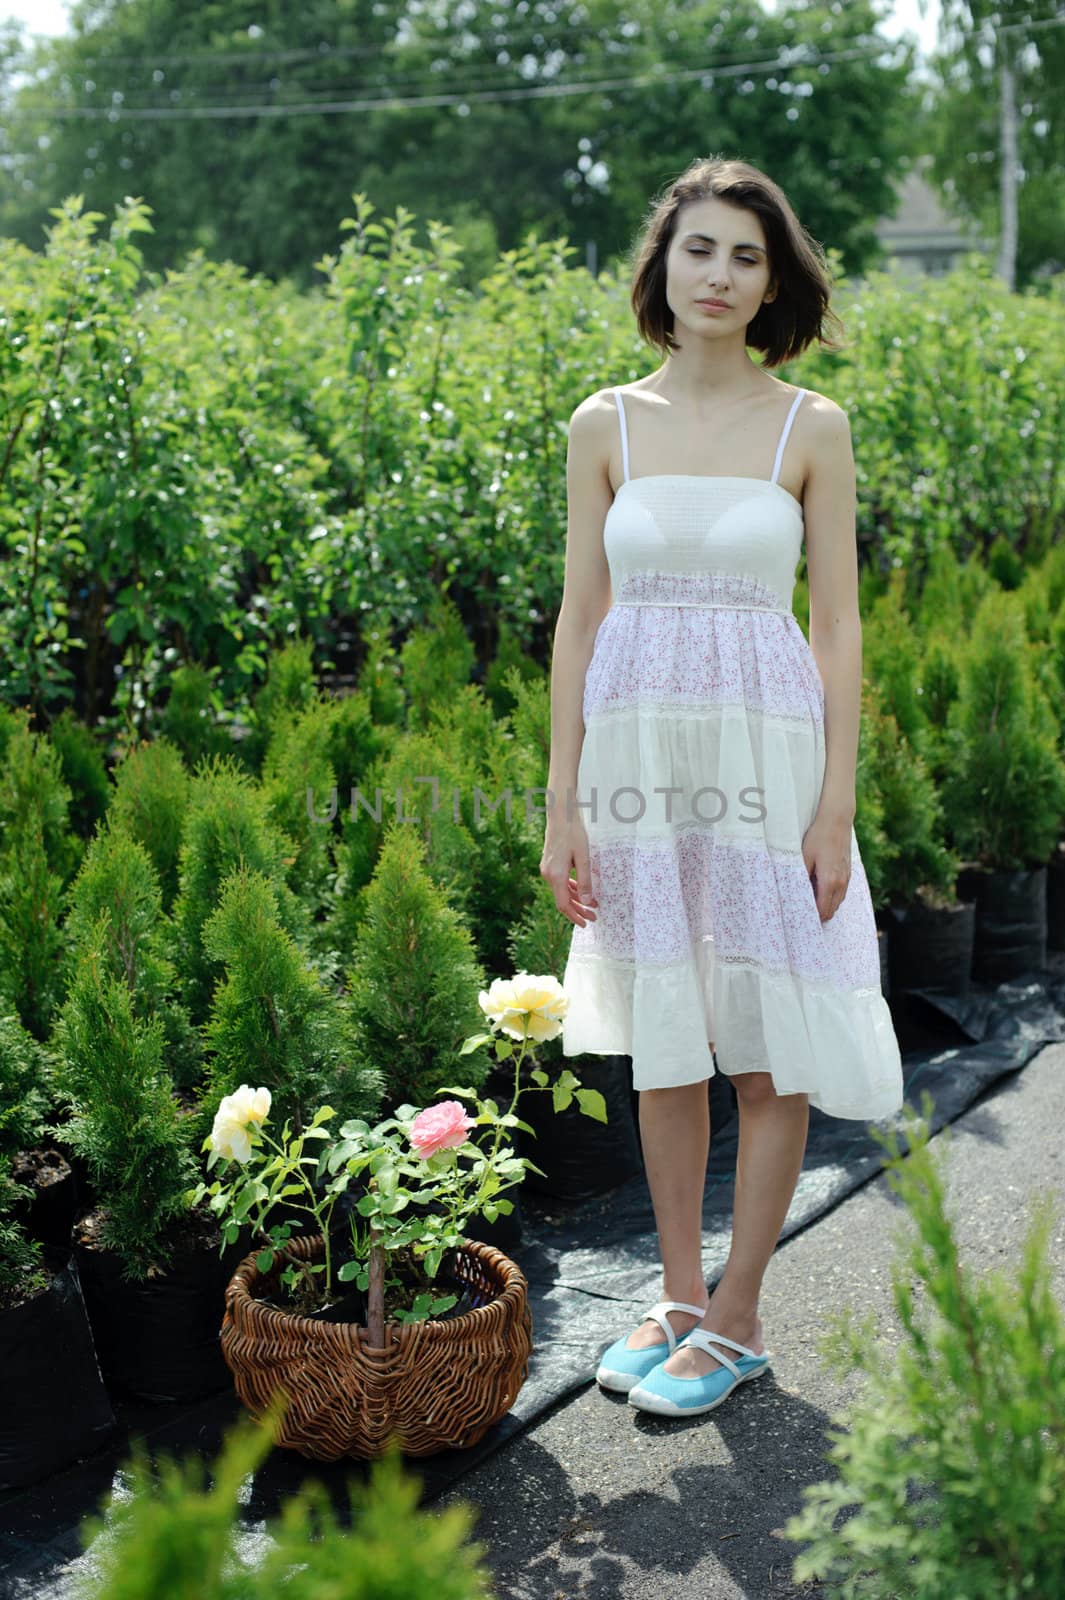 An image of a young girl in the garden